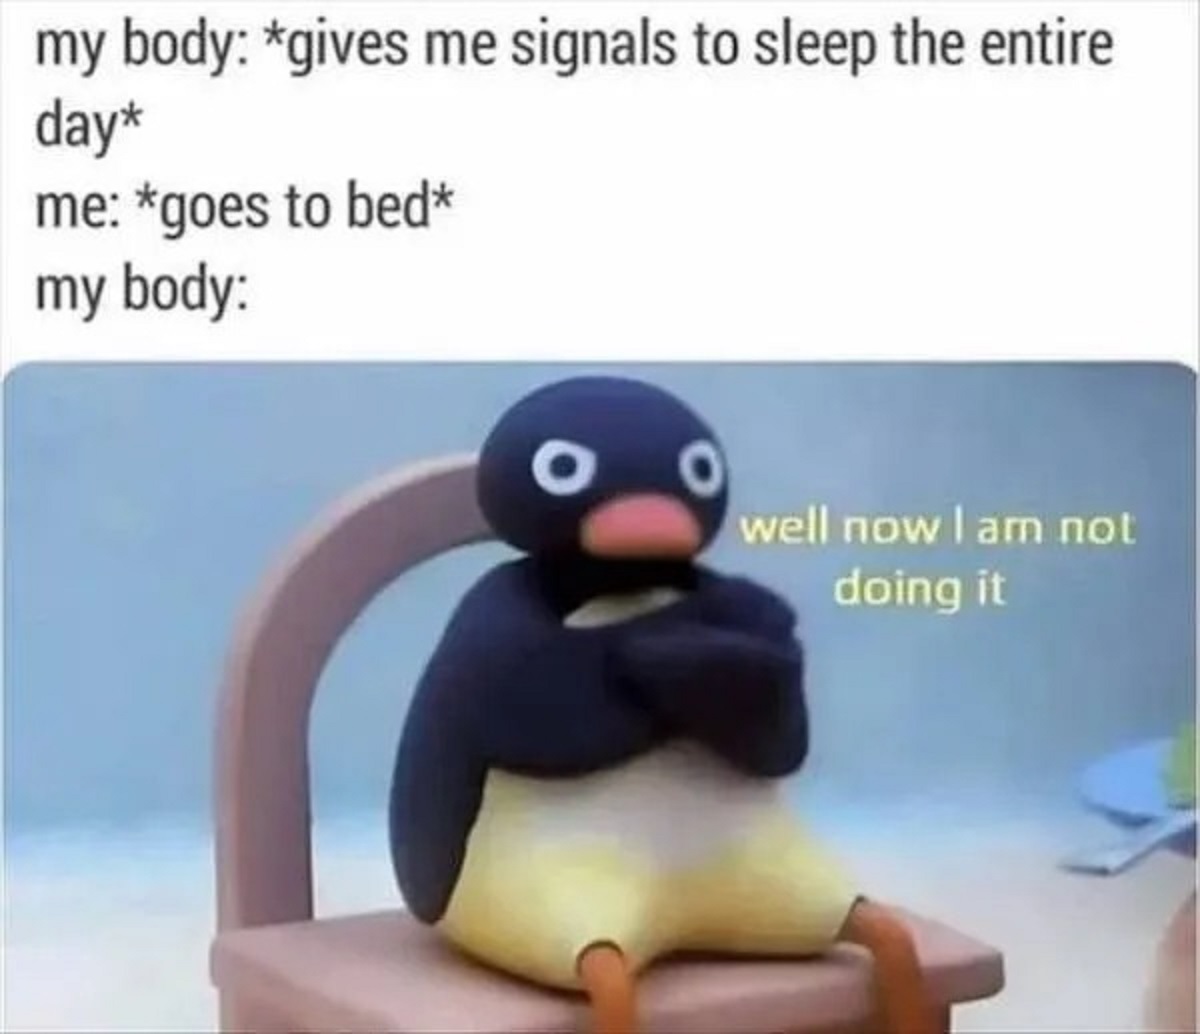 funny 202 memes - my body gives me signals to sleep the entire day me goes to bed my body well now I am not doing it